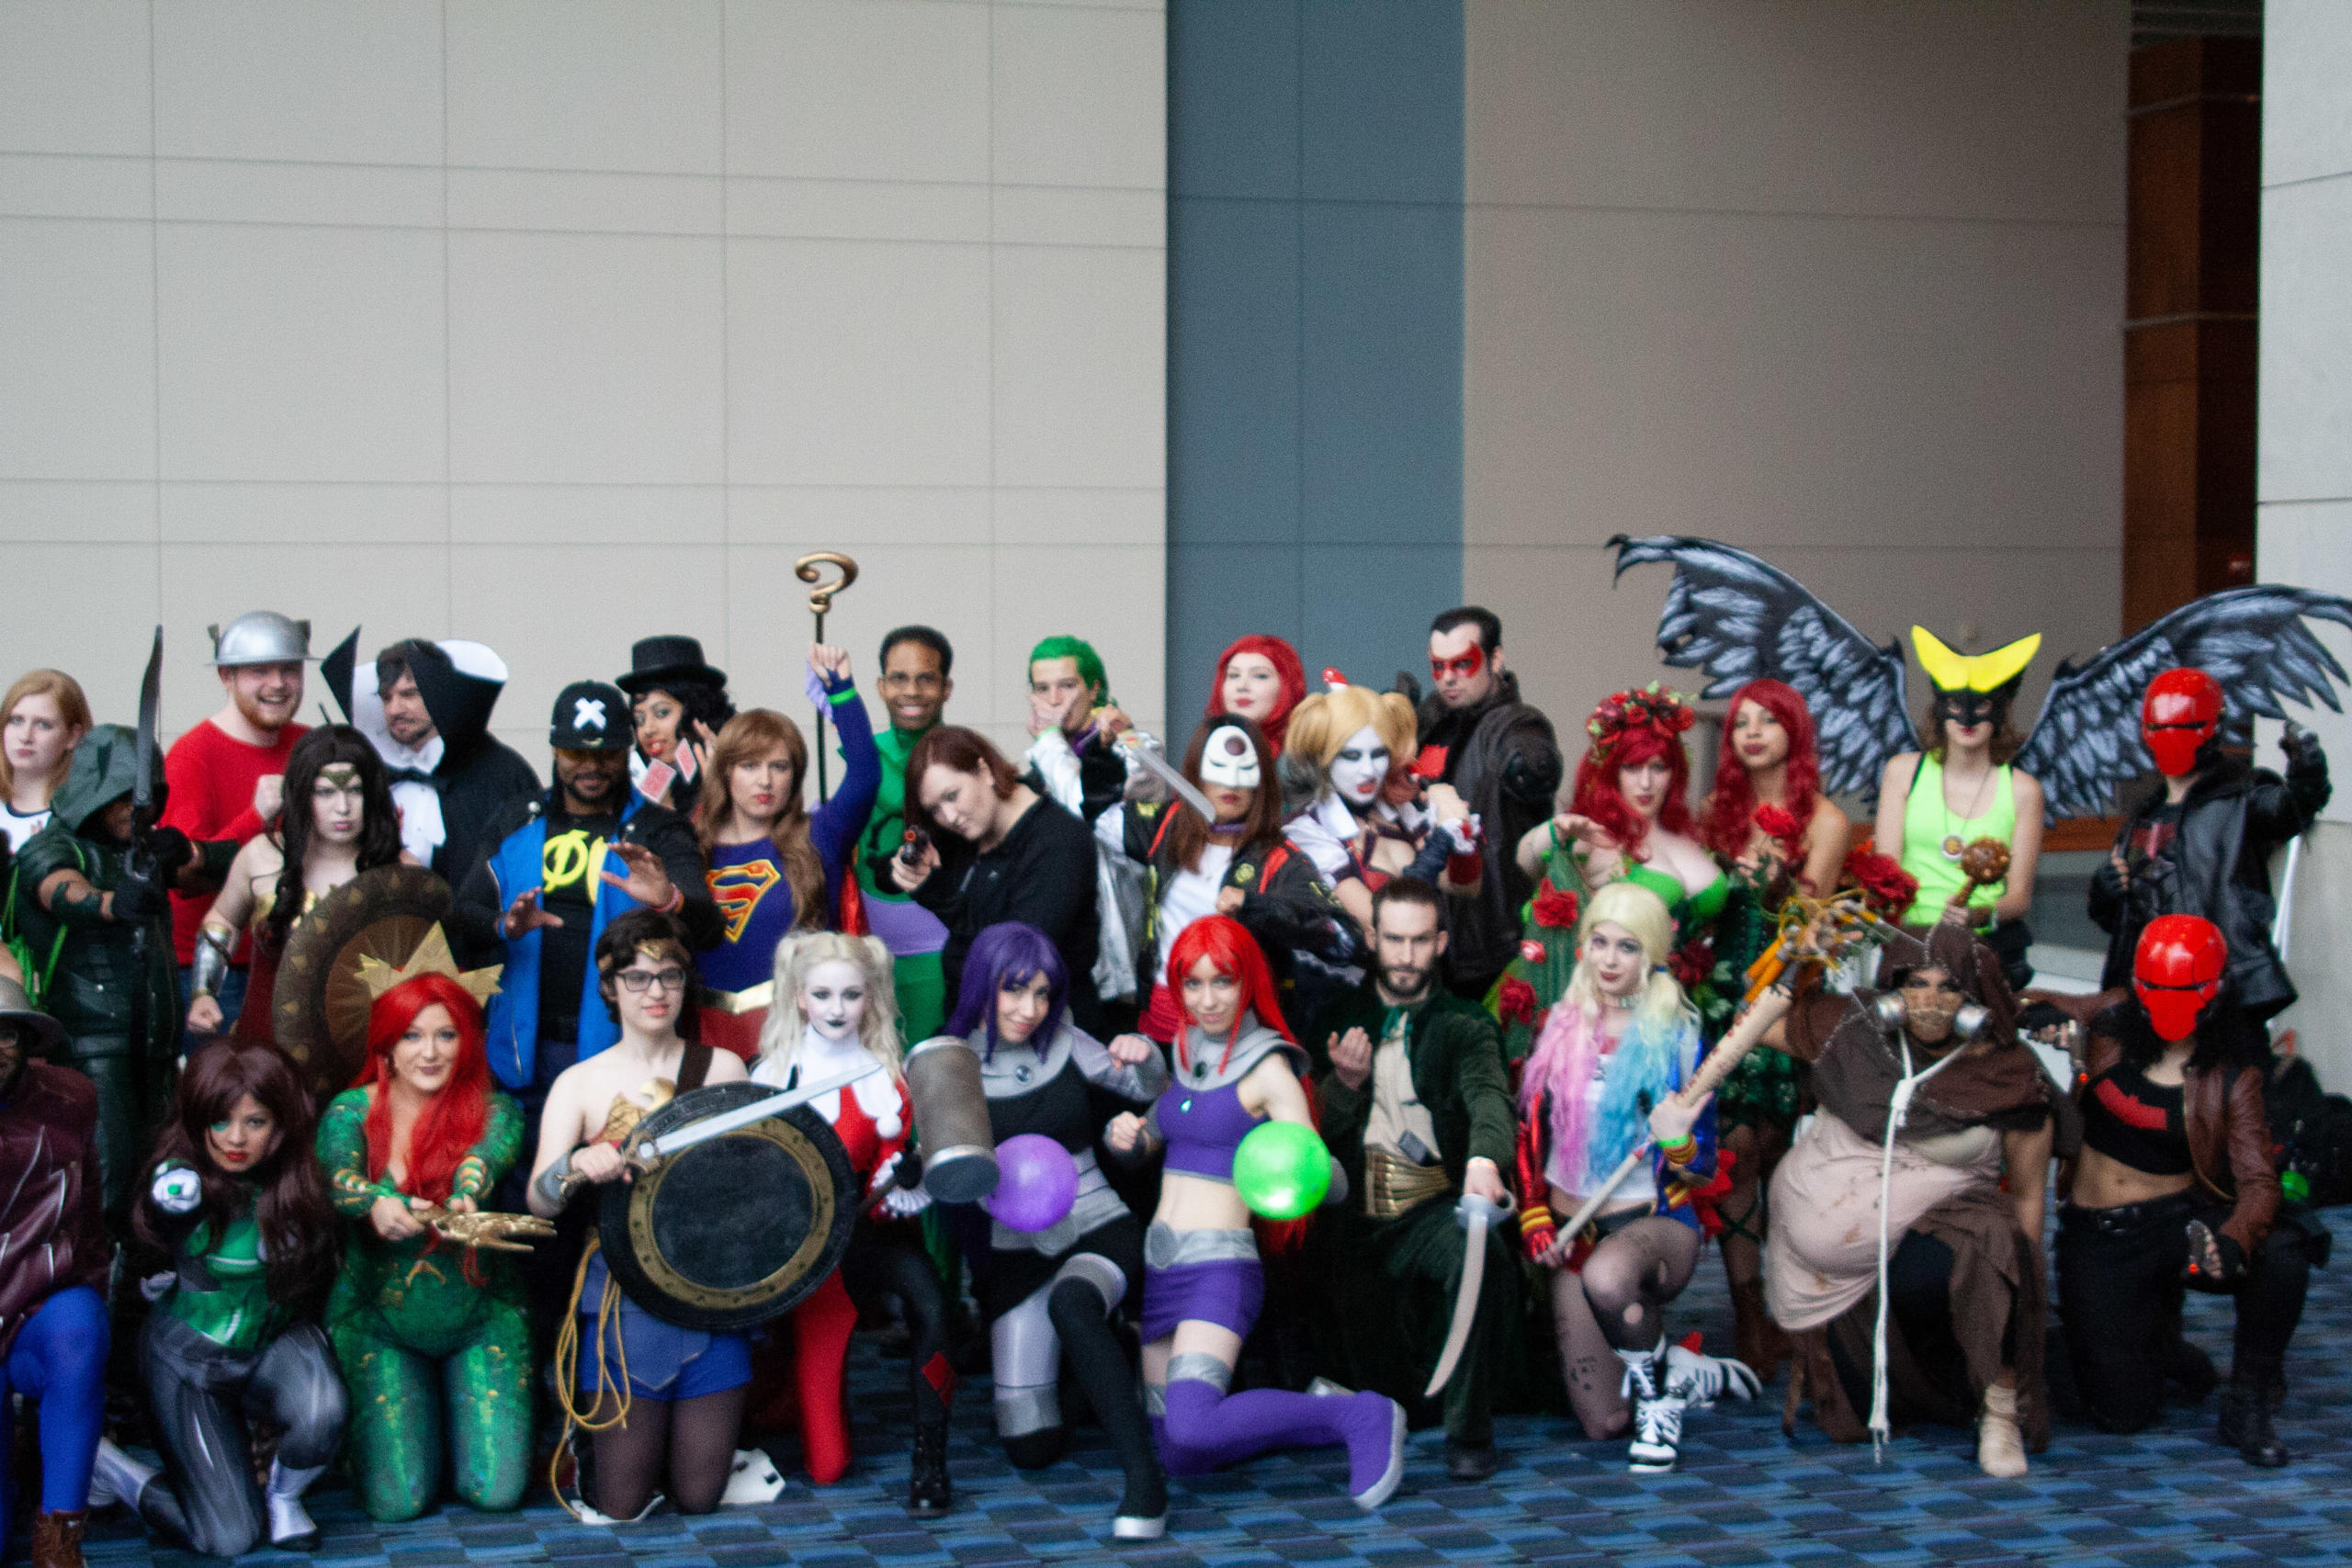 How to attend a convention: Tips for going to fan cons - Philadelphia ...